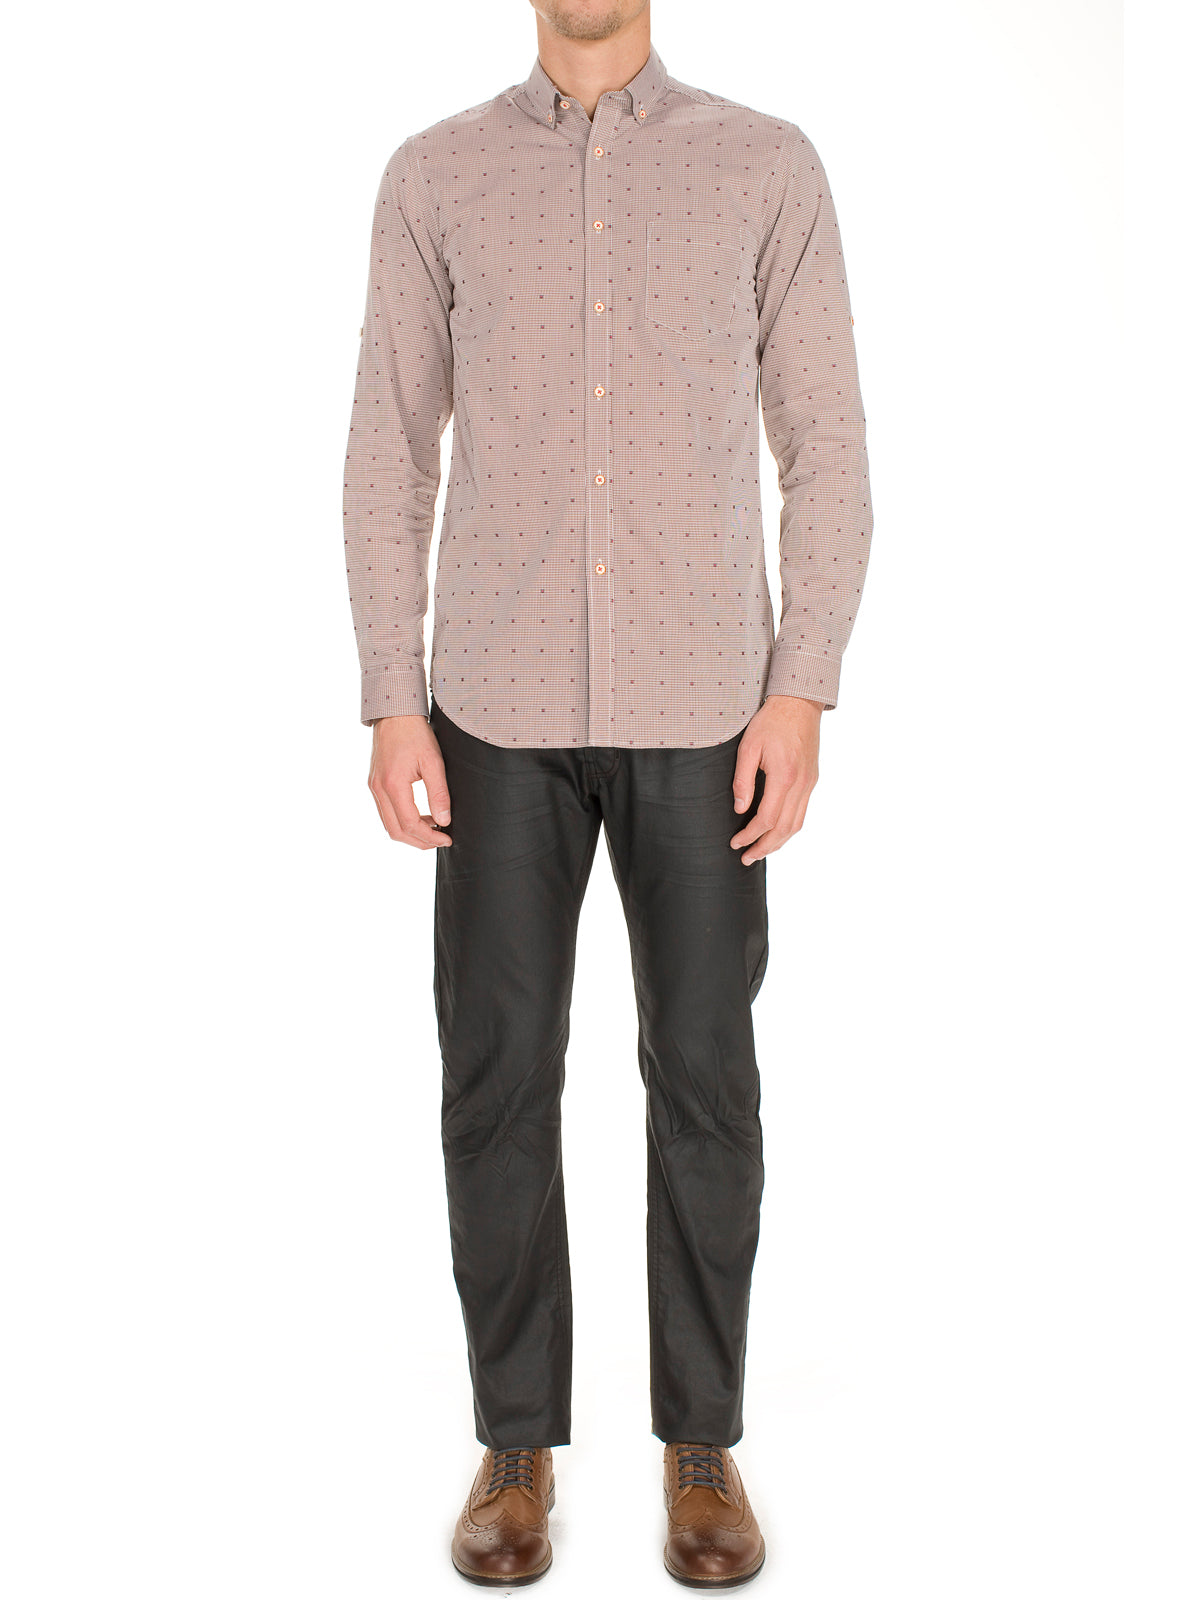 STRATTON CHEST PCKT SLIM FIT BROWNX